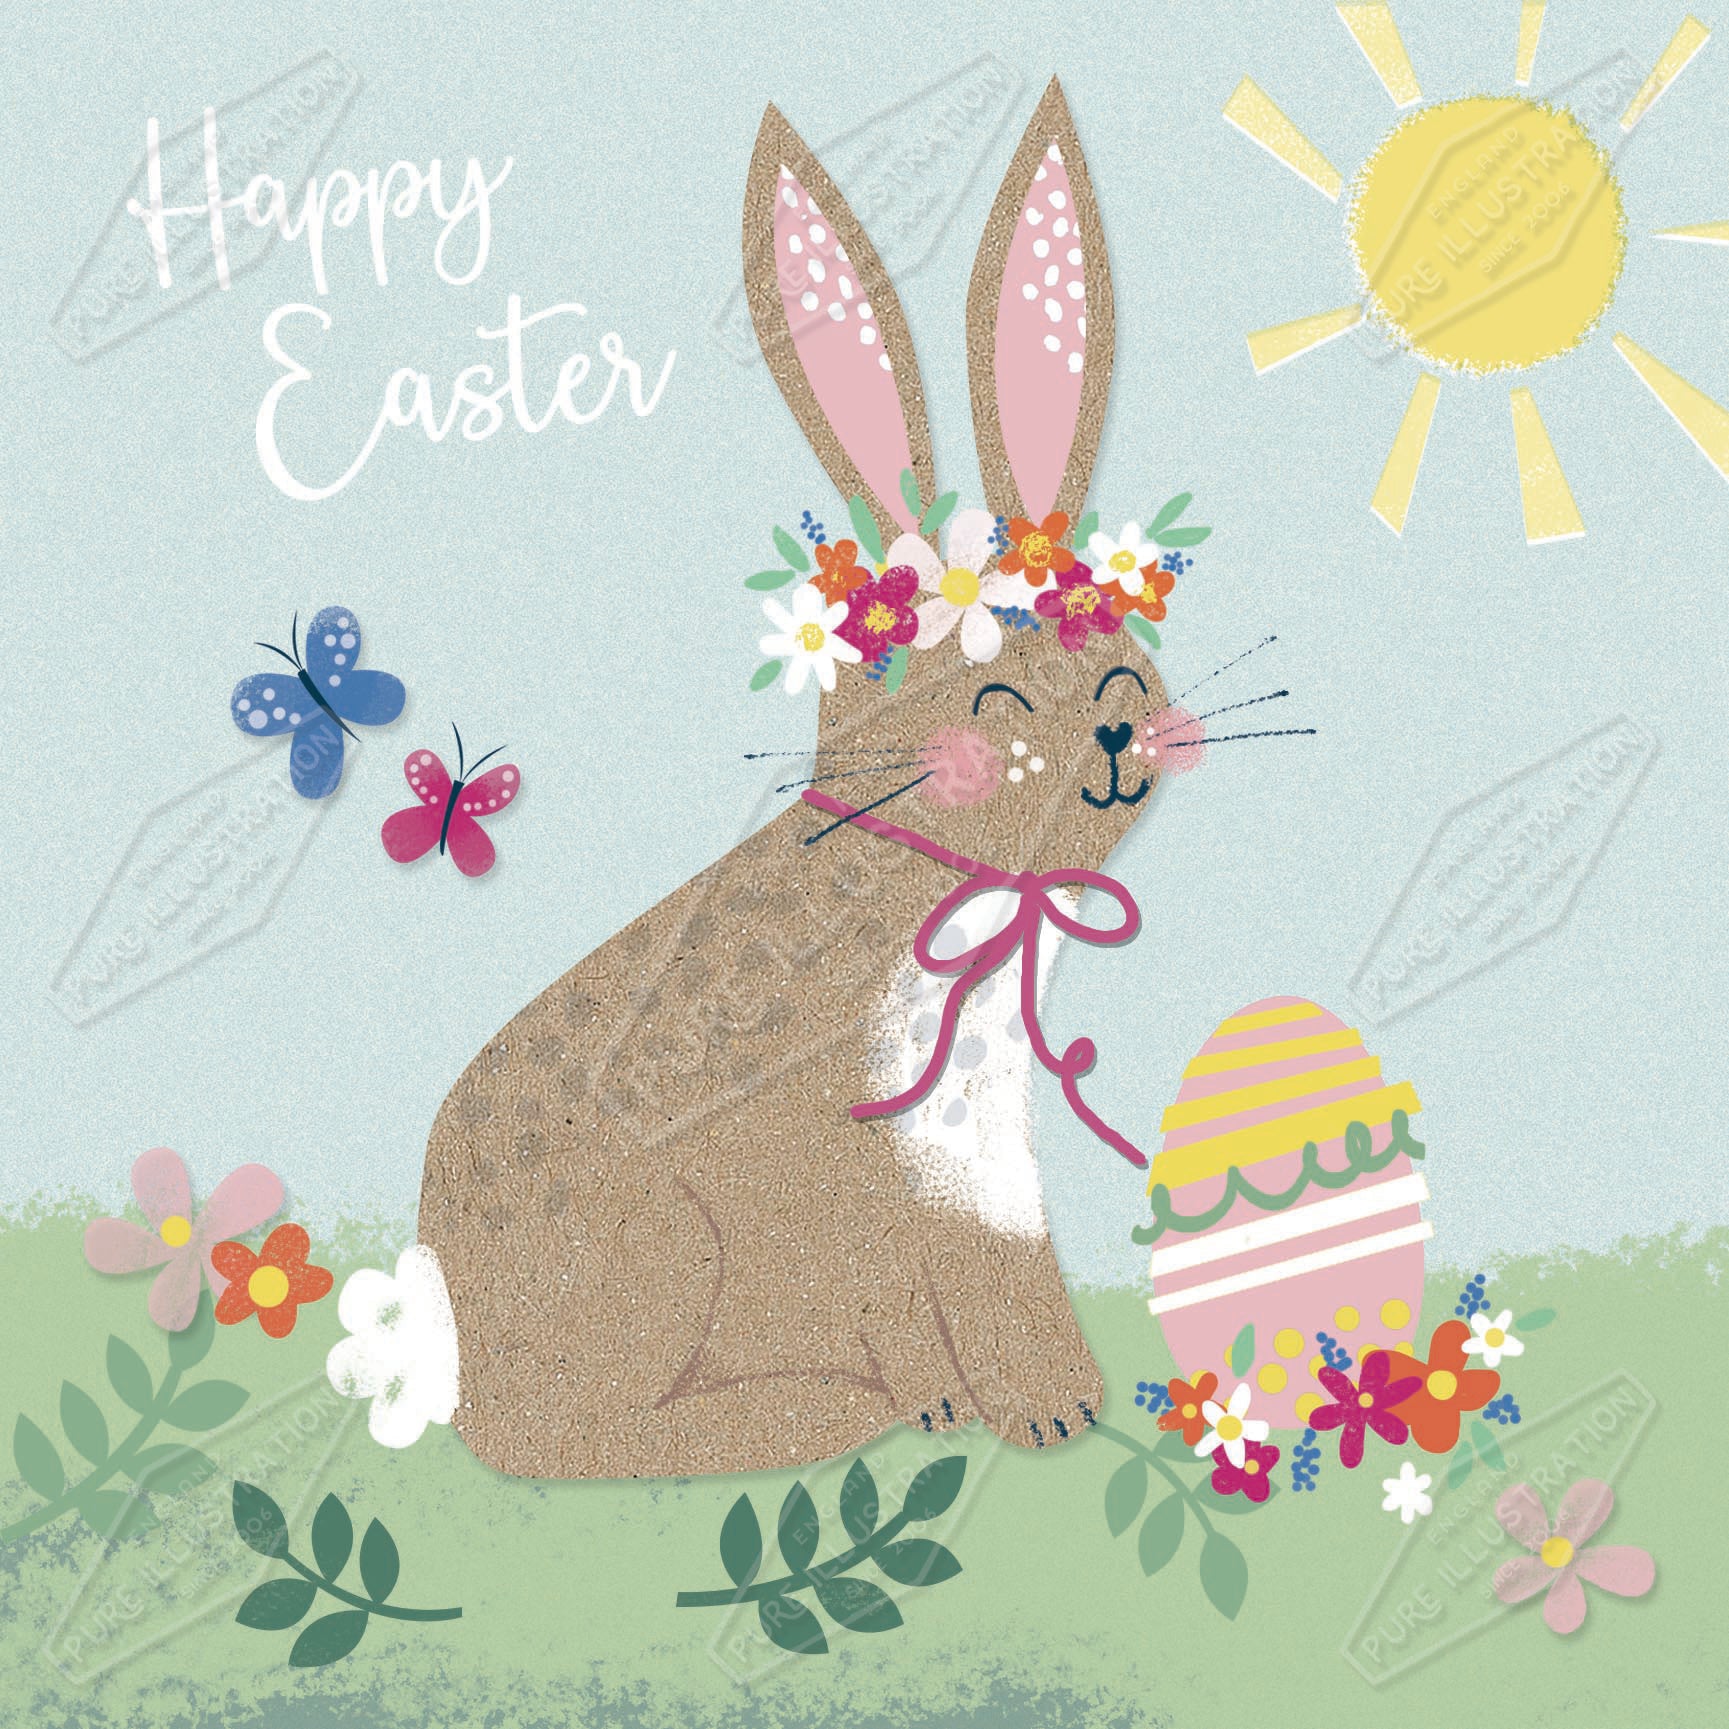 00035578SLA- Sarah Lake is represented by Pure Art Licensing Agency - Easter Greeting Card Design